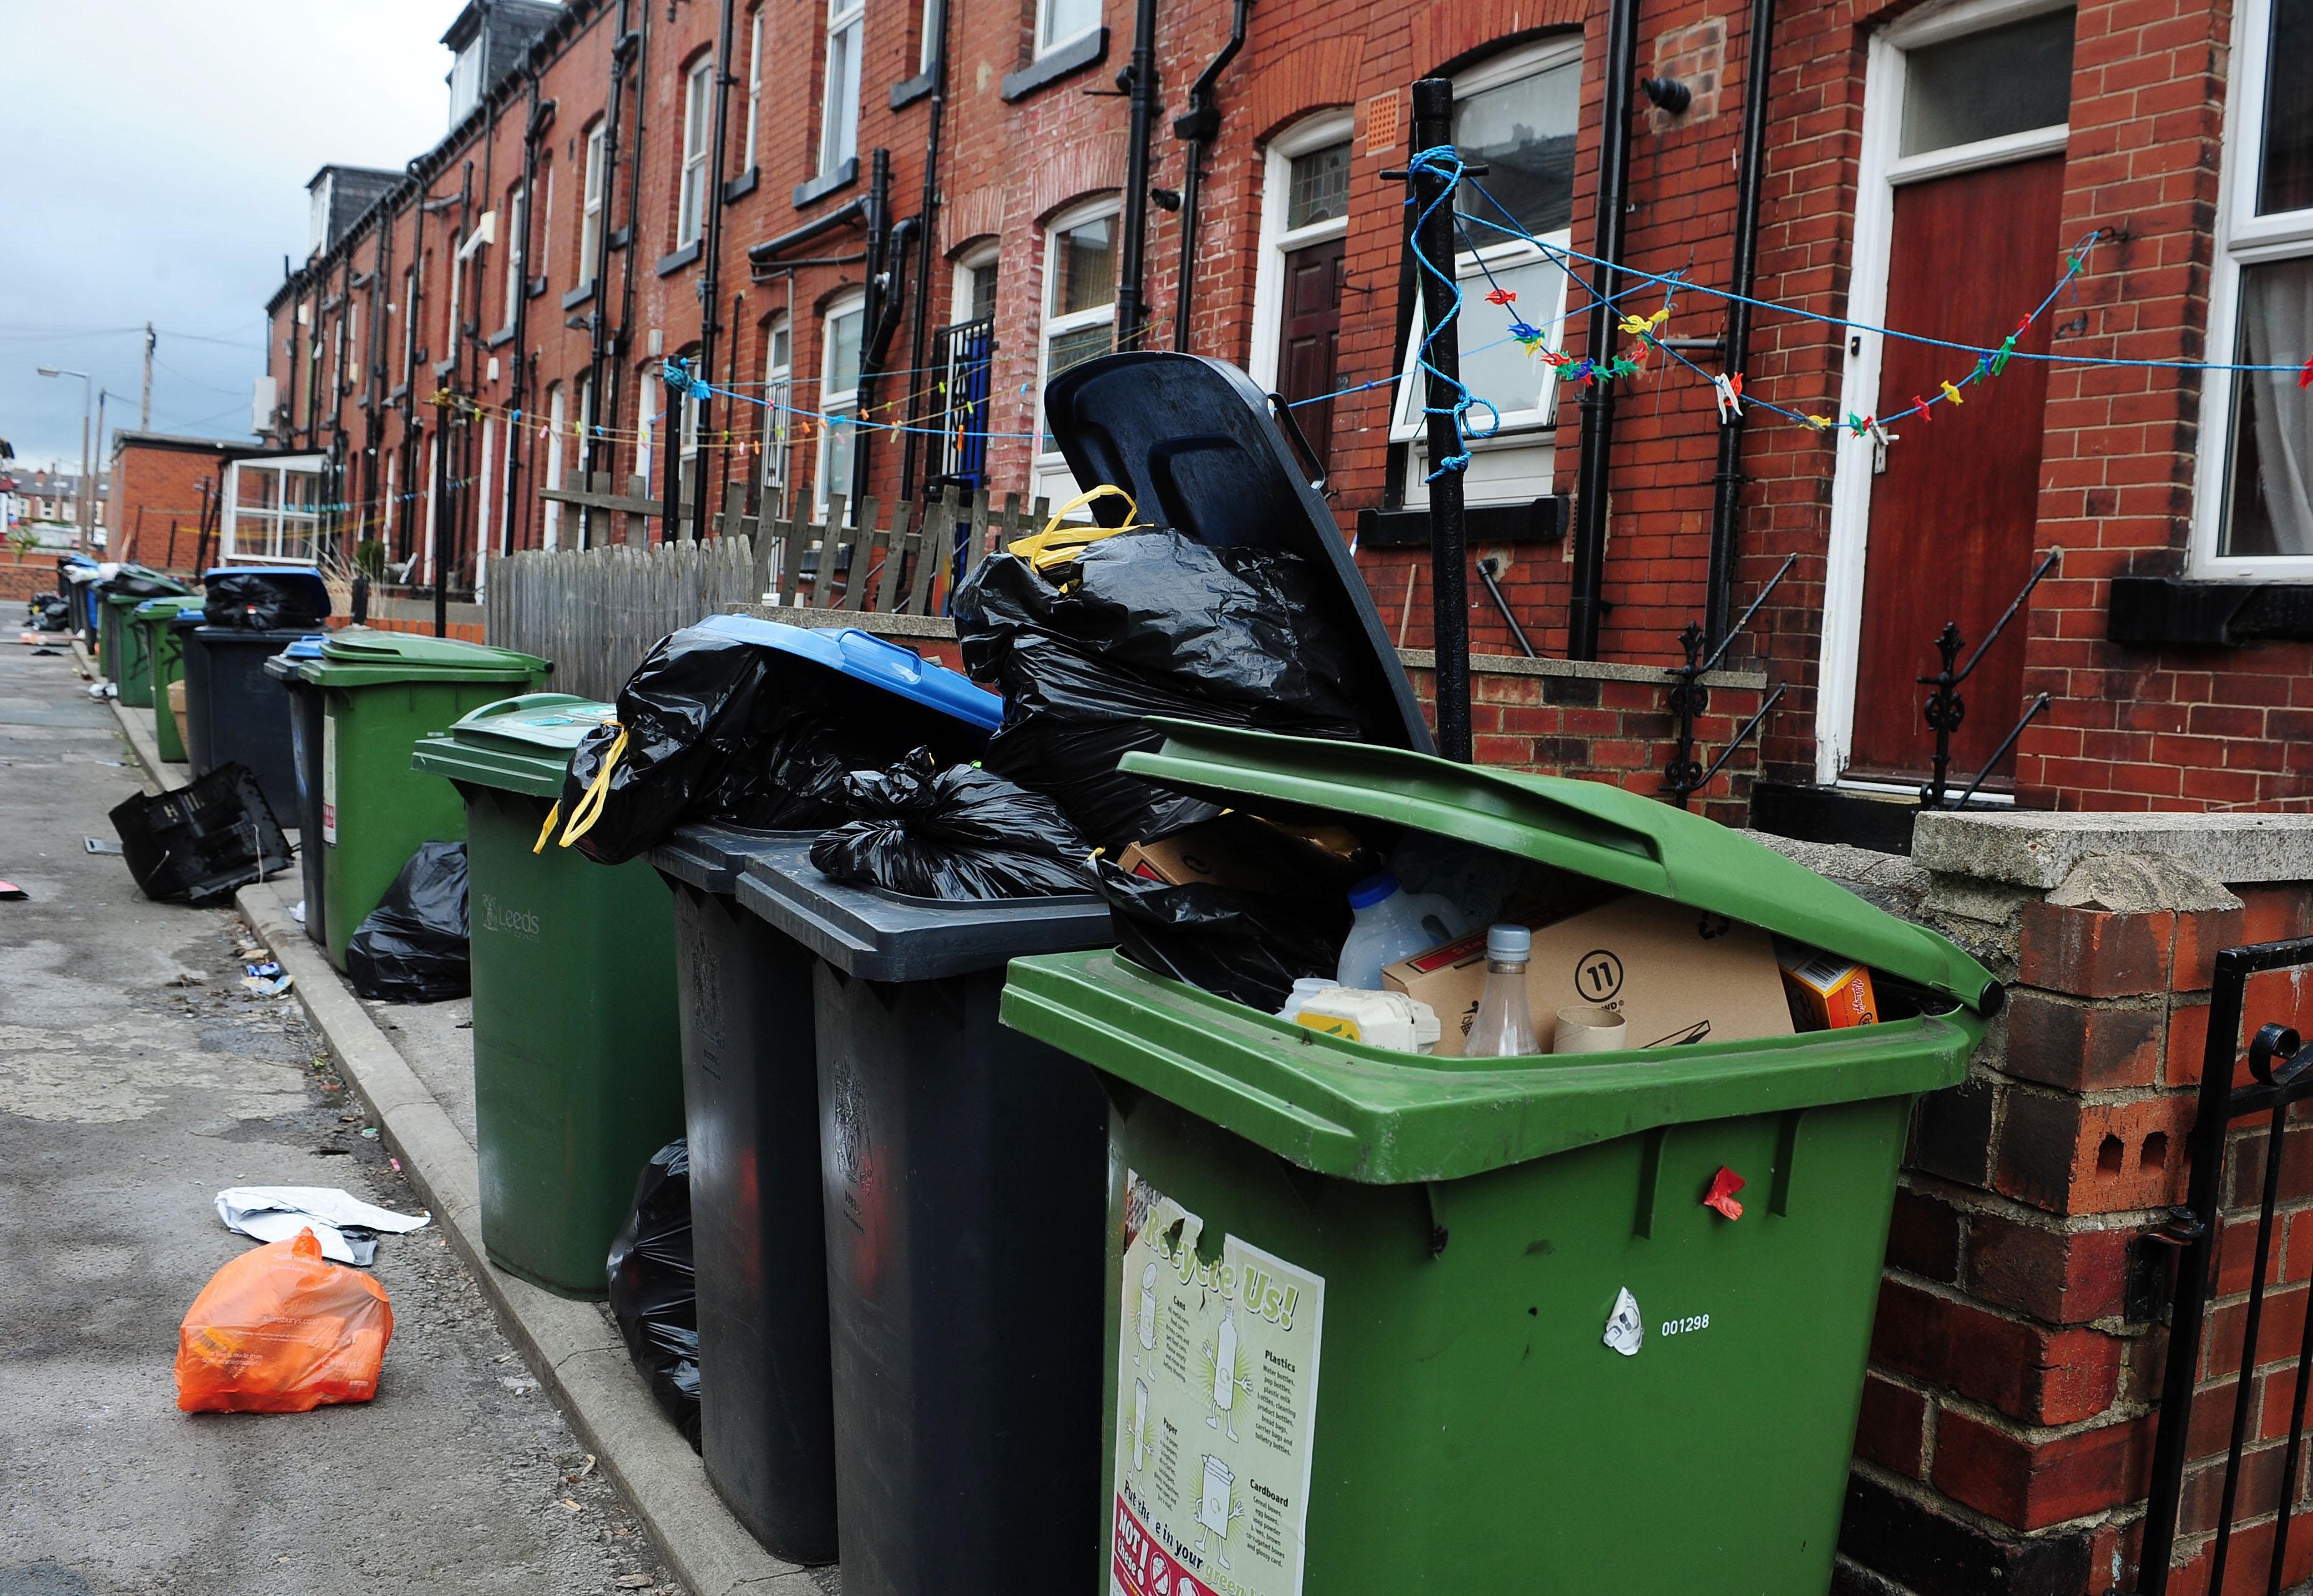 Any disruption to bin collections could bring painful reminders of the chaos of the 1978 Winter of Discontent when rubbish piled up in the streets